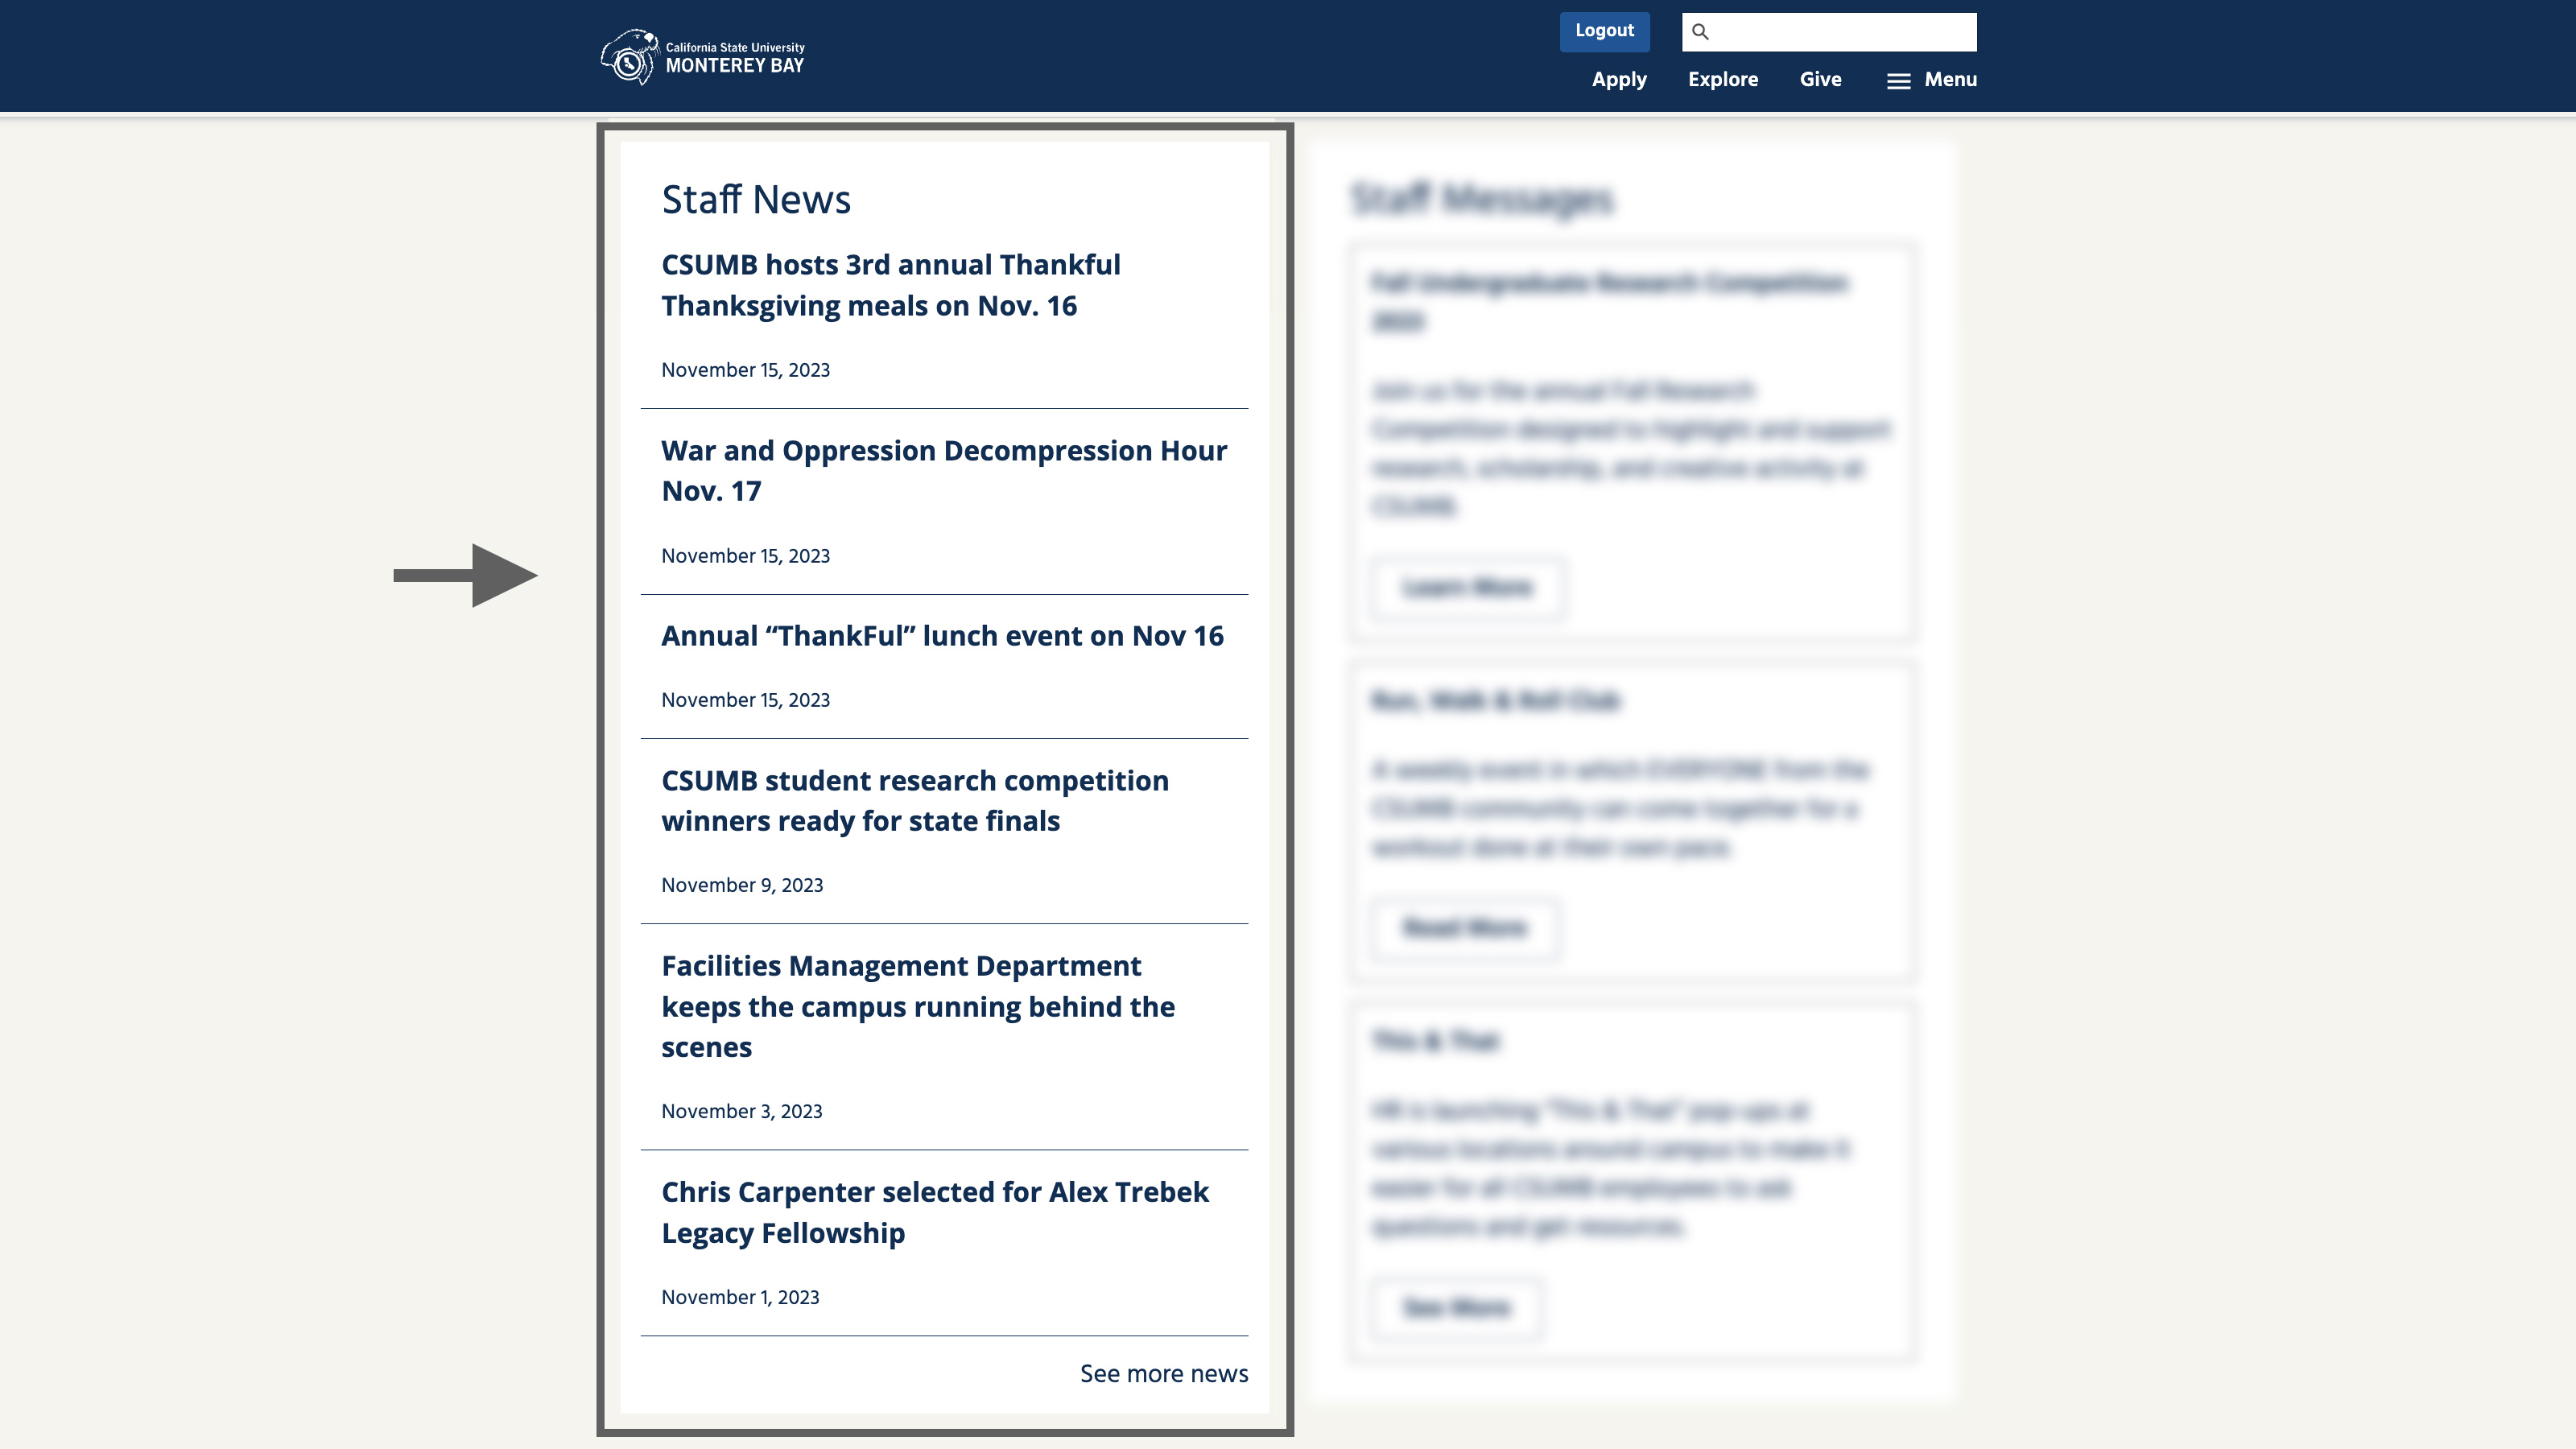 Screenshot: The news section of the staff dashboard